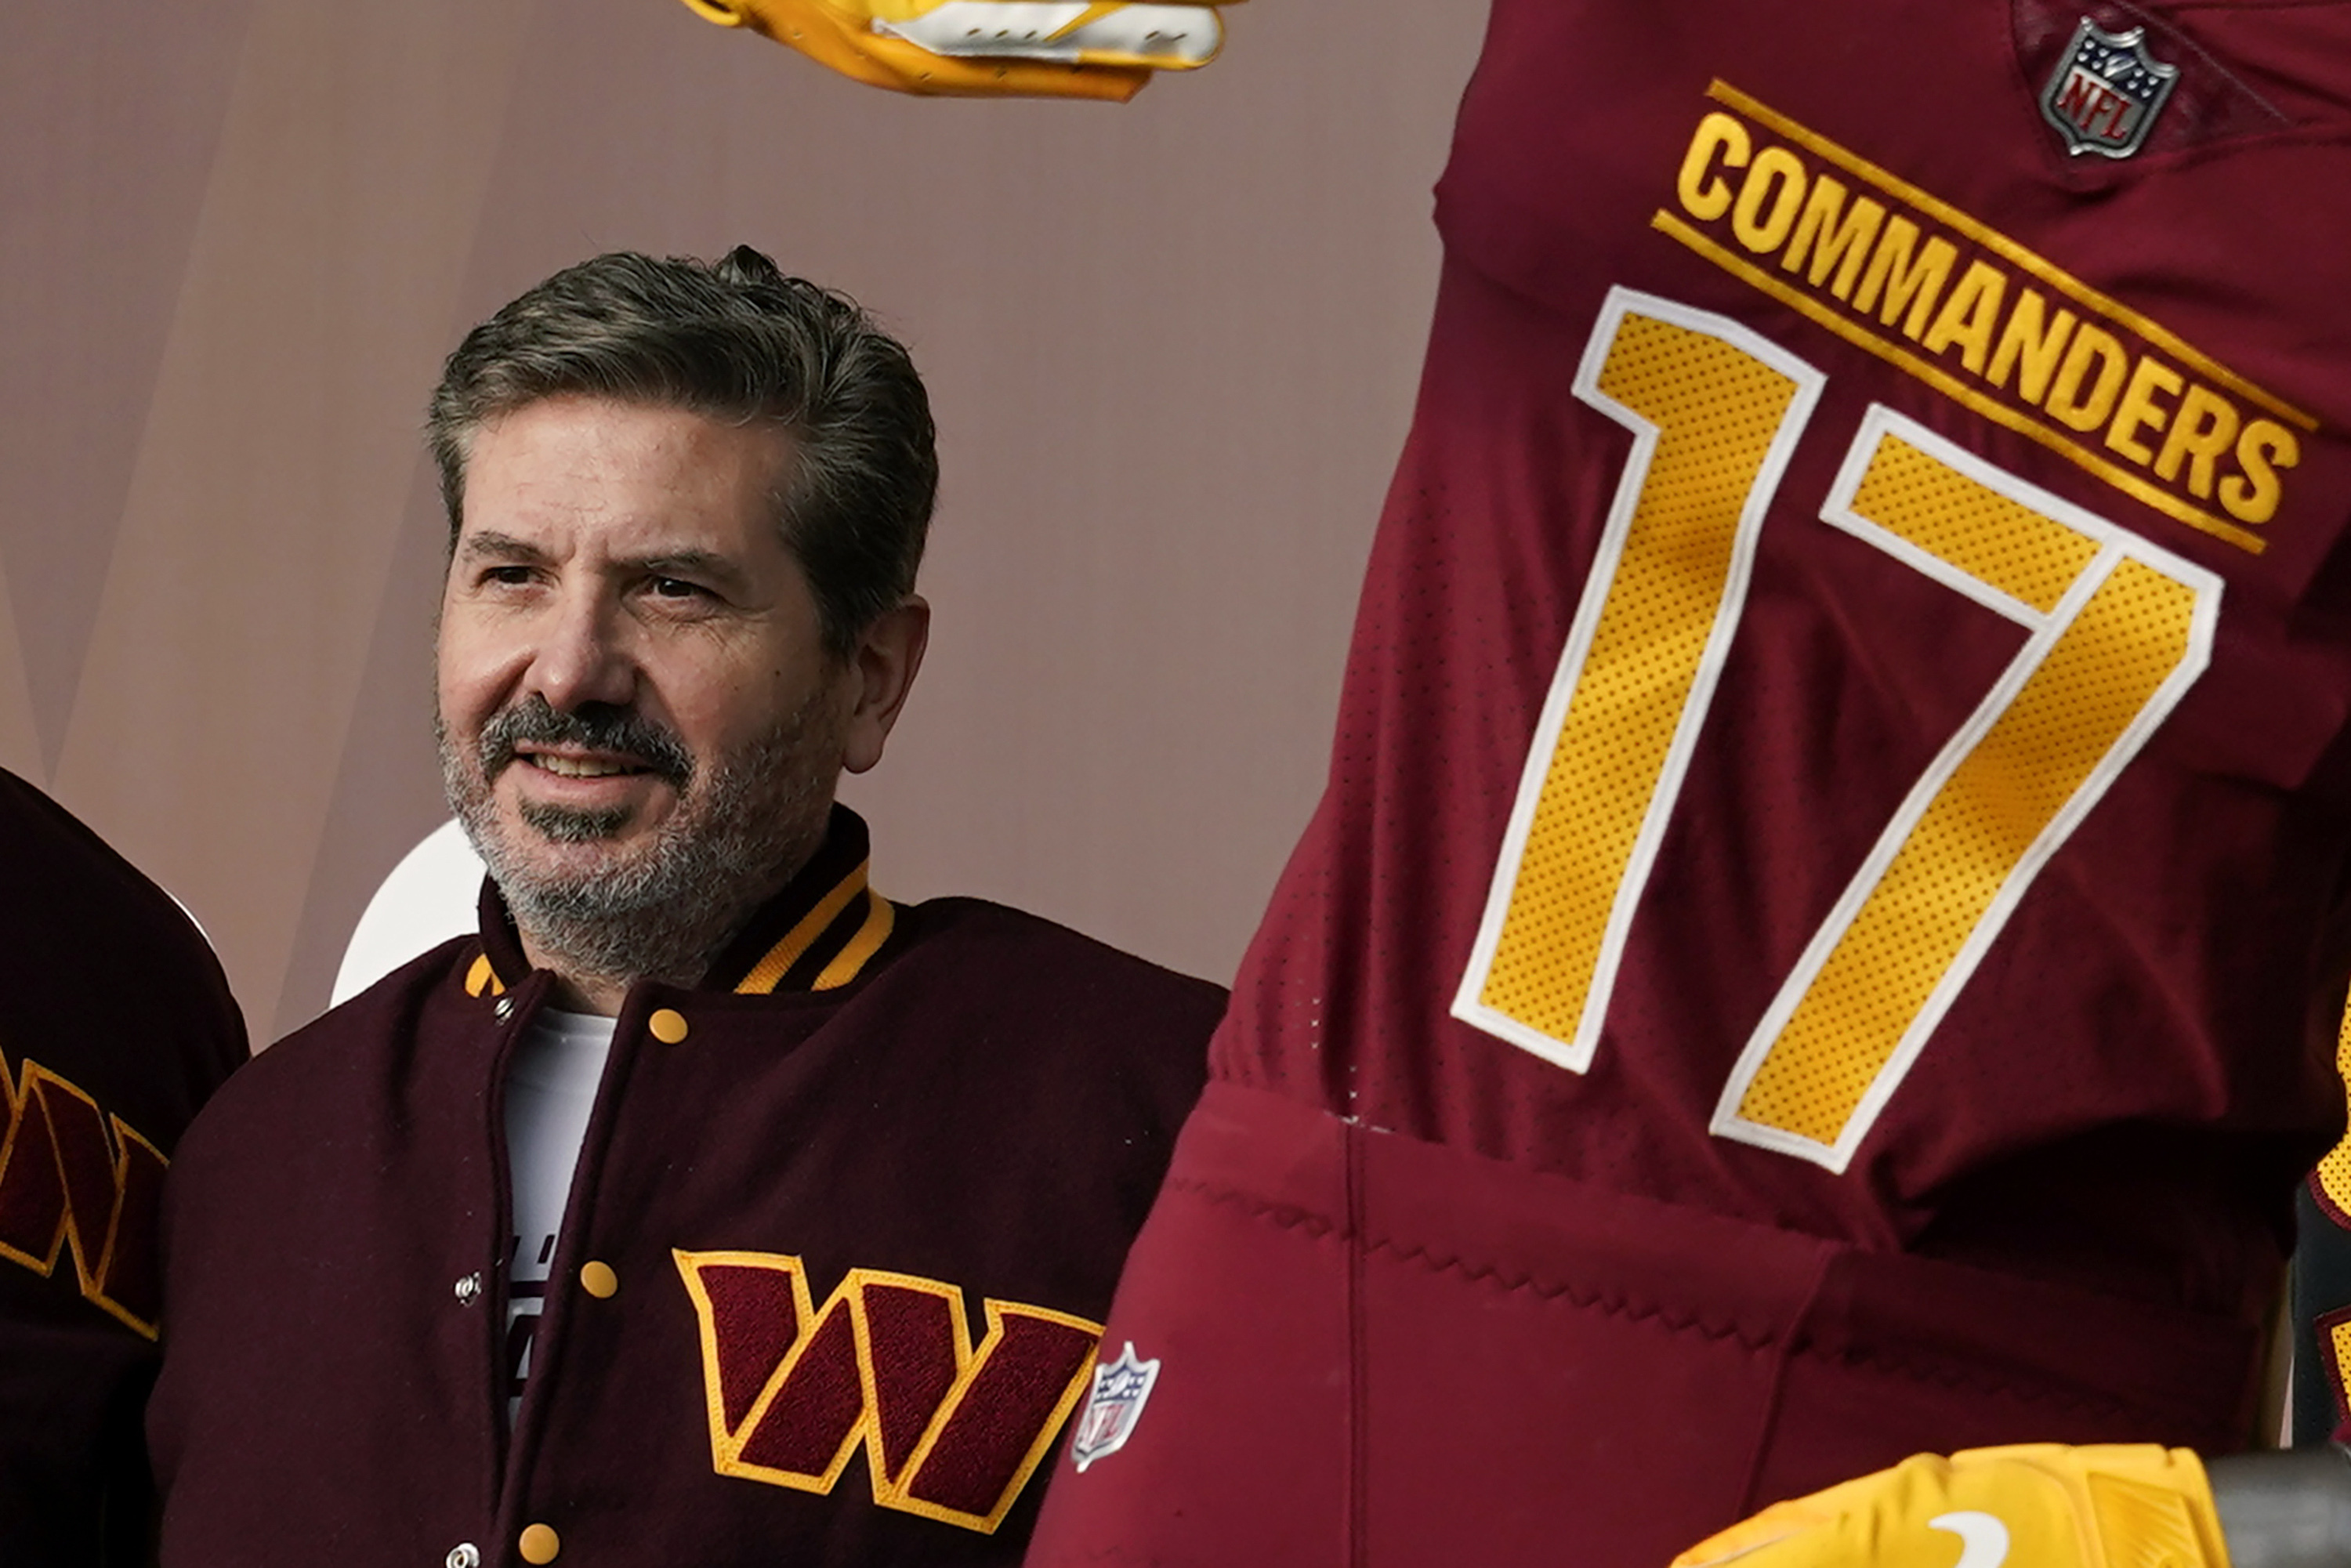 Commanders Owner Dan Snyder Testifies Before House Panel Investigating Workplace Misconduct